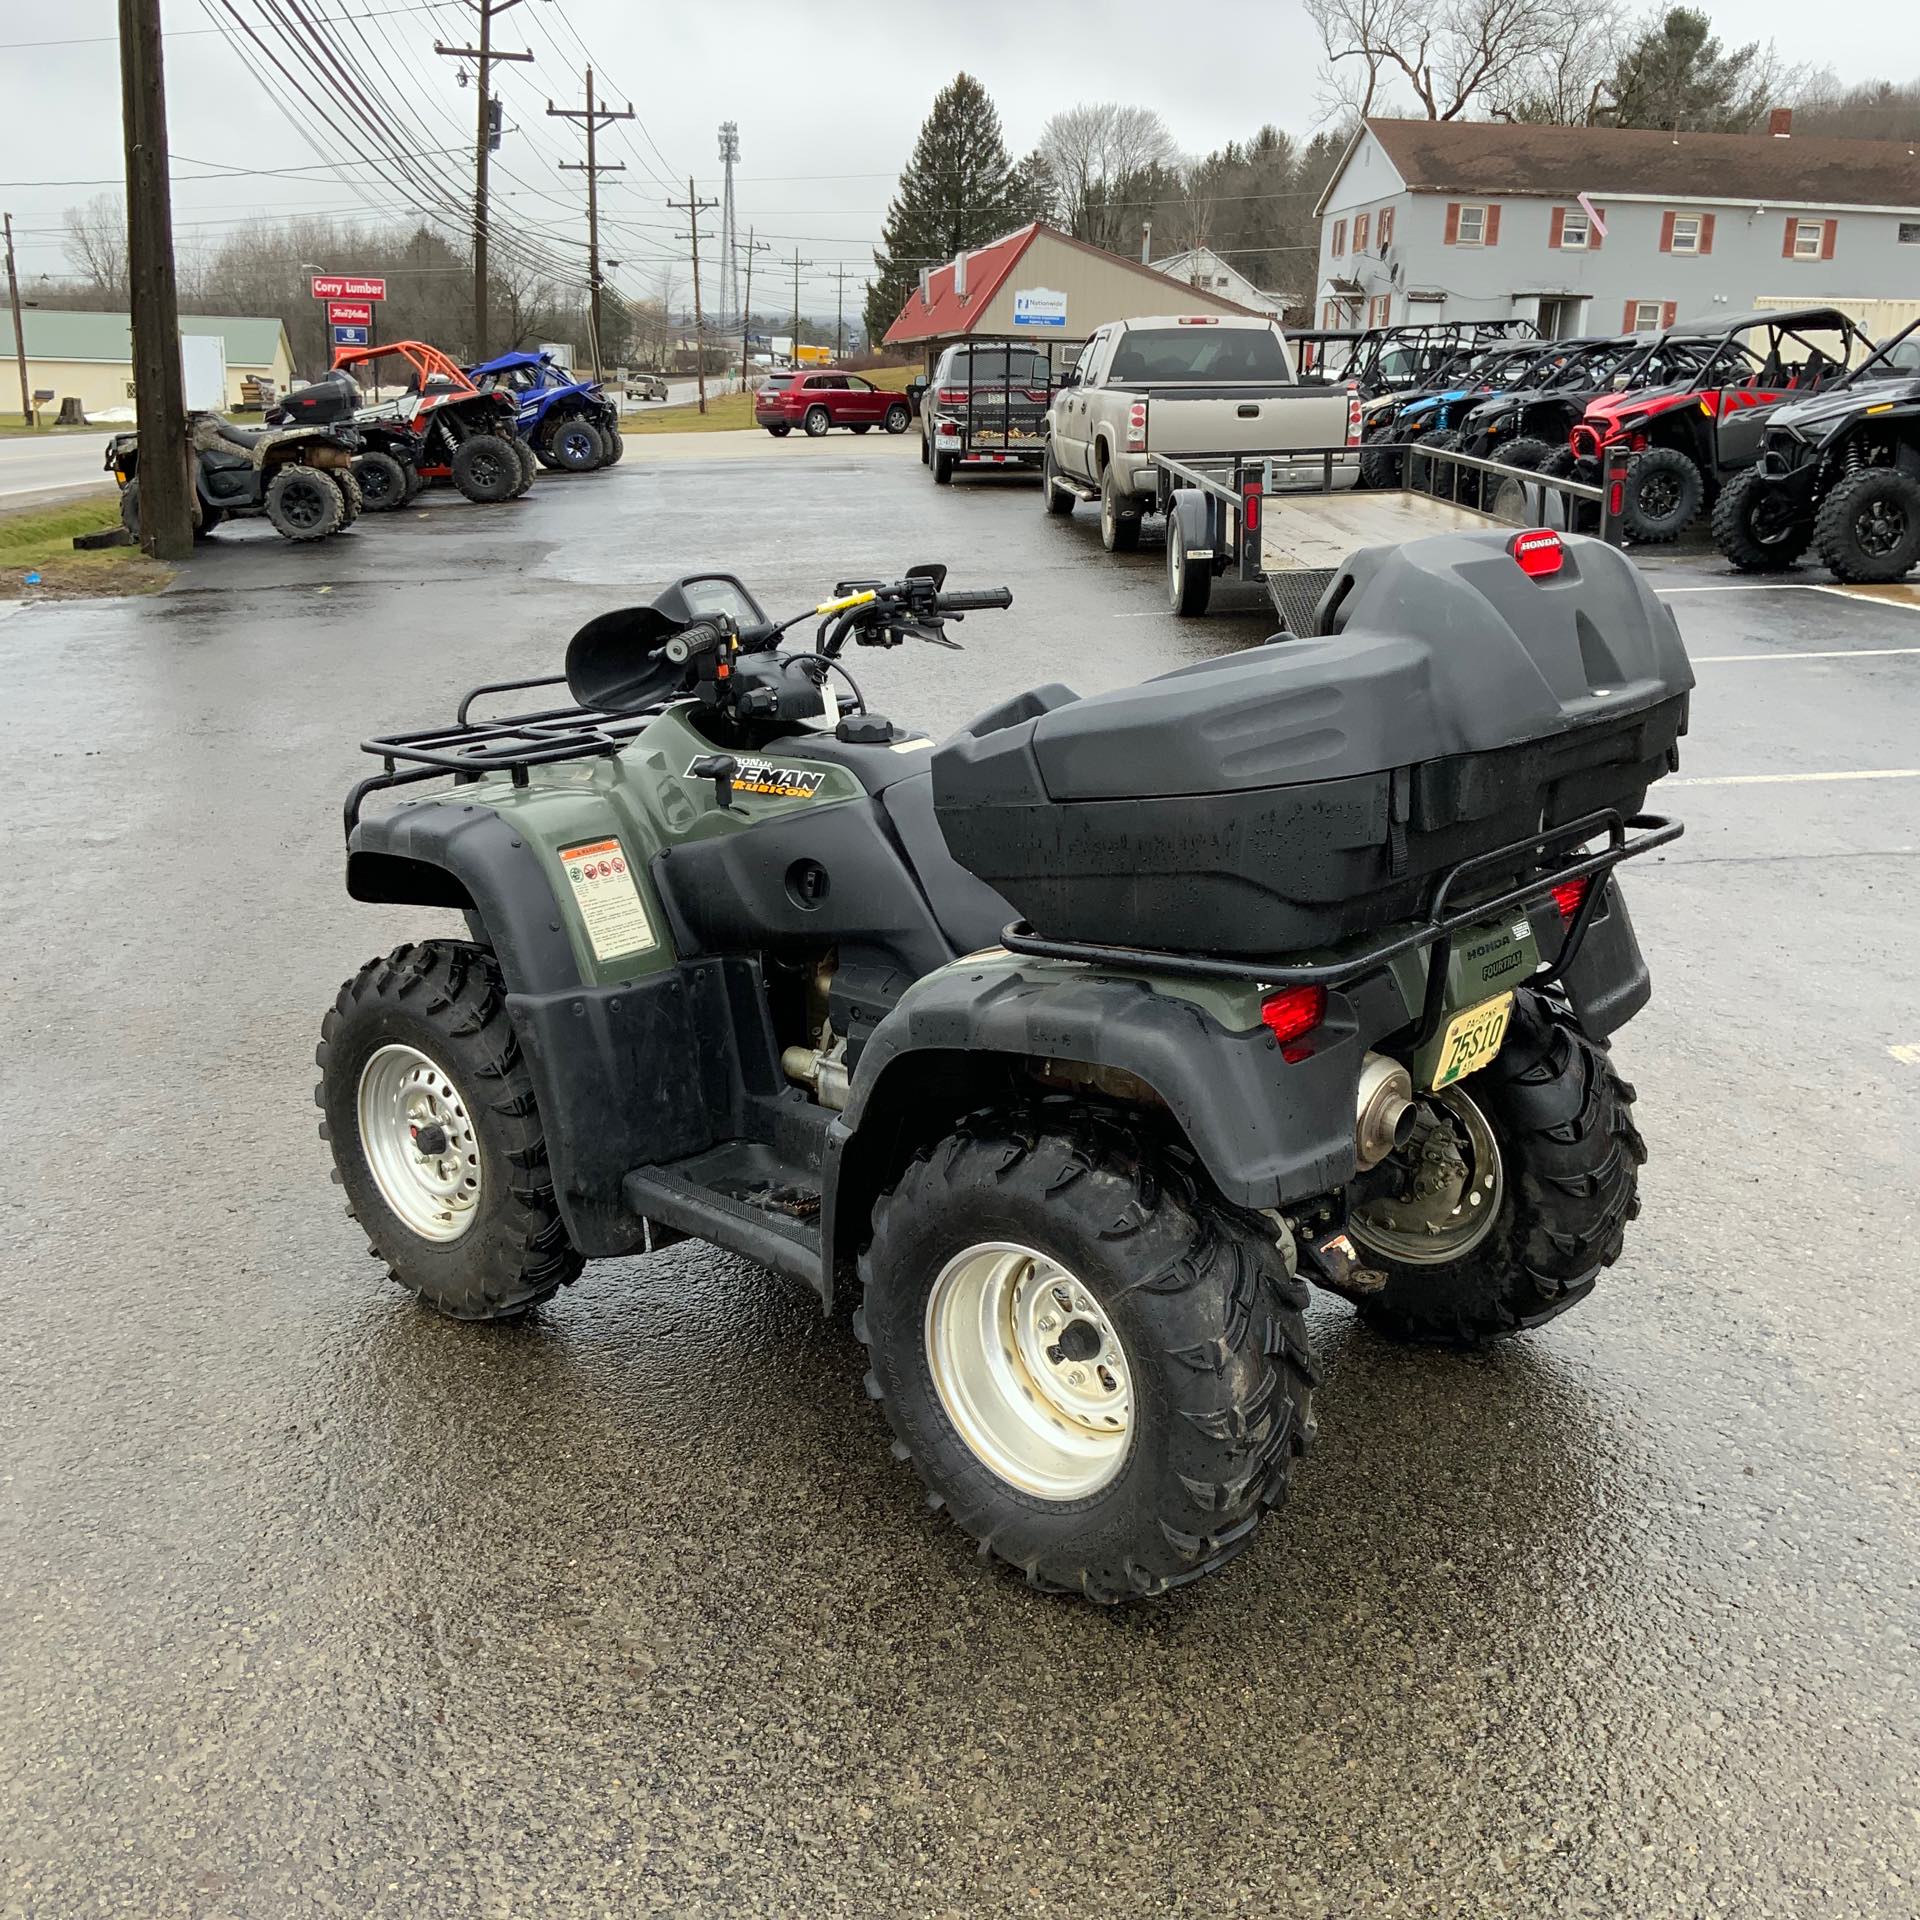 2002 HONDA TRX500FA2 at Leisure Time Powersports of Corry